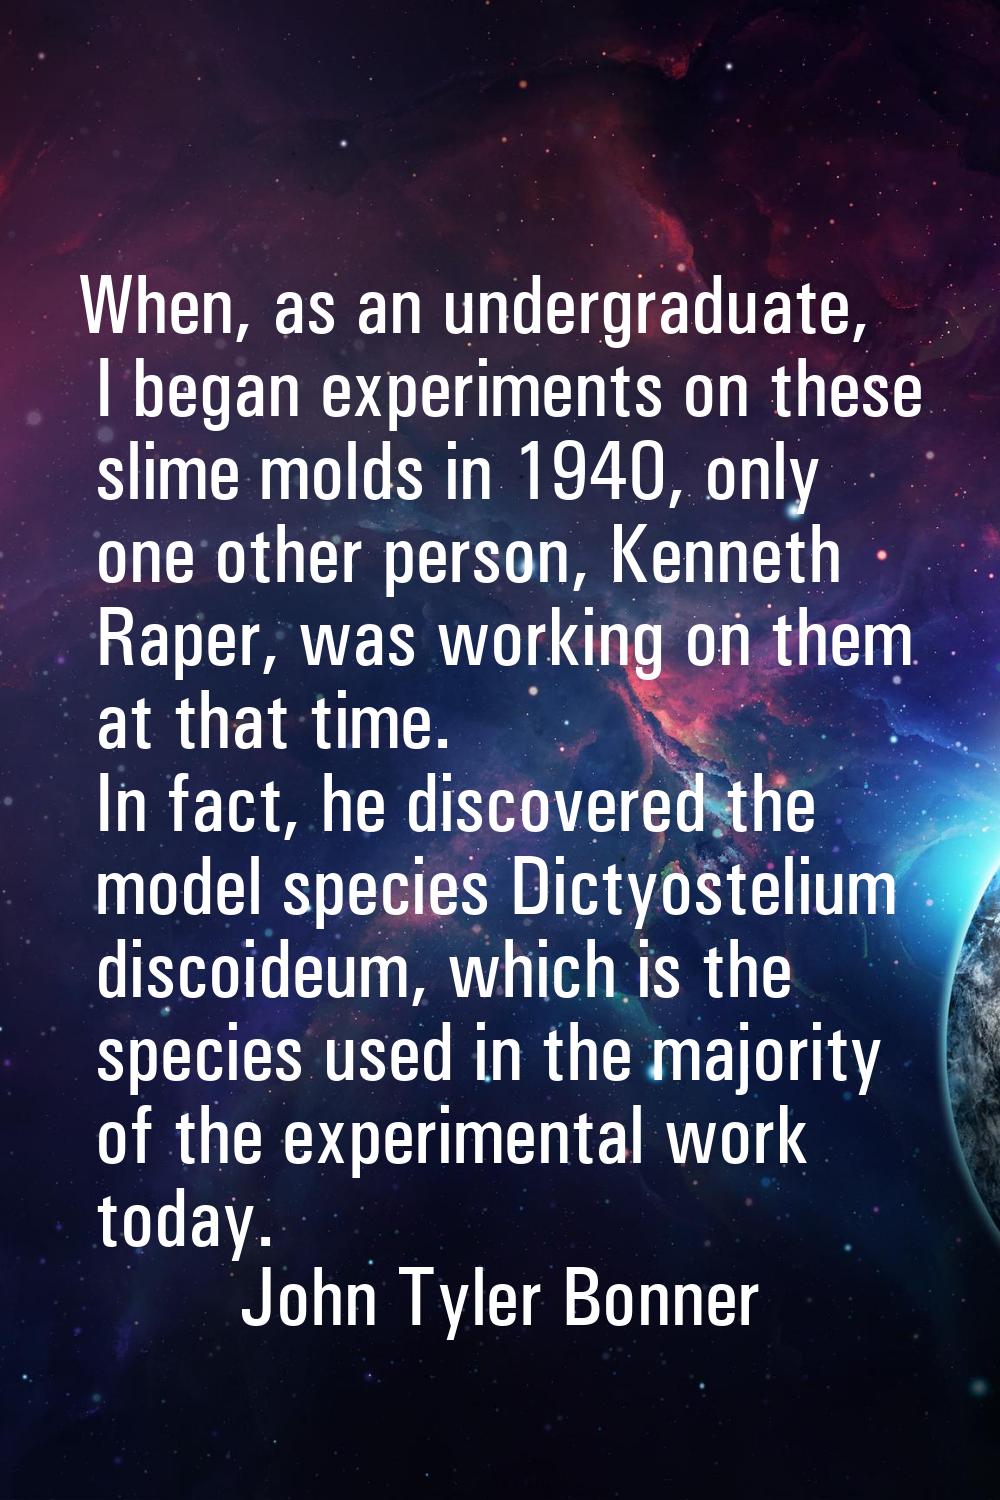 When, as an undergraduate, I began experiments on these slime molds in 1940, only one other person,